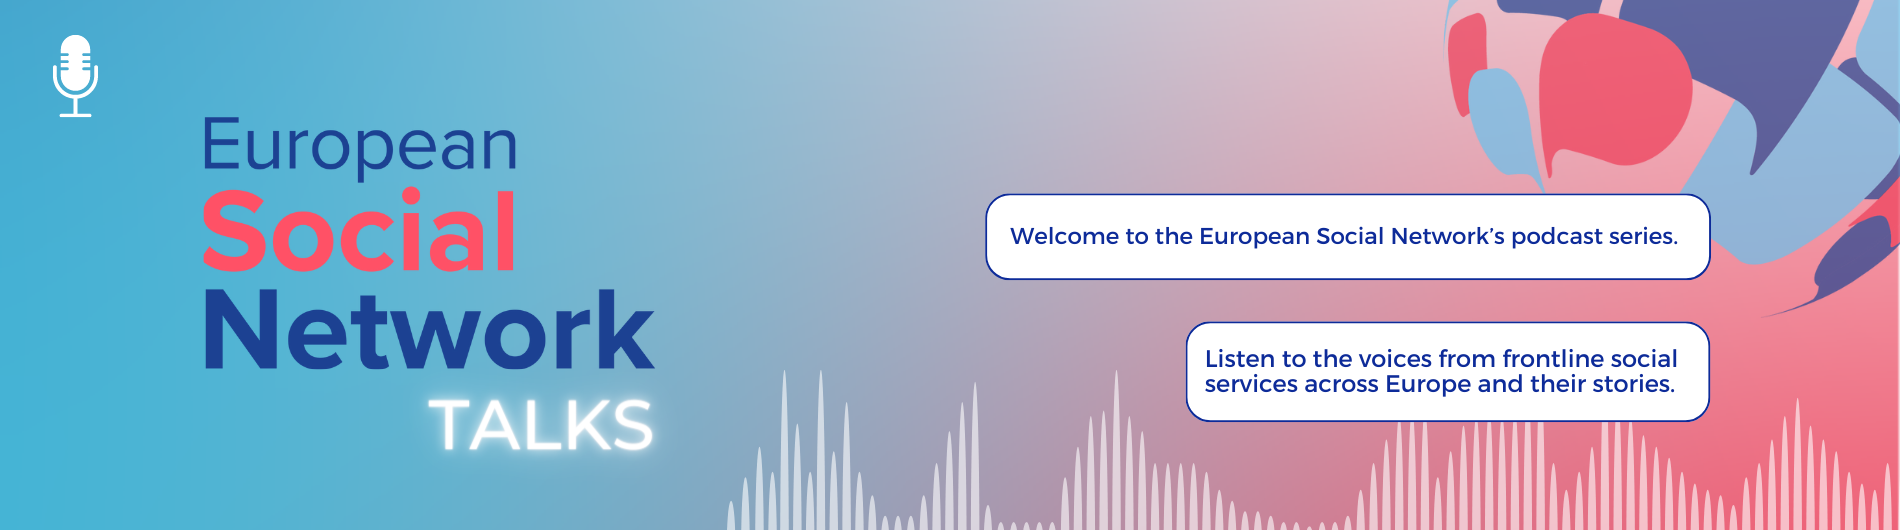 banner promoting ESN podcasts